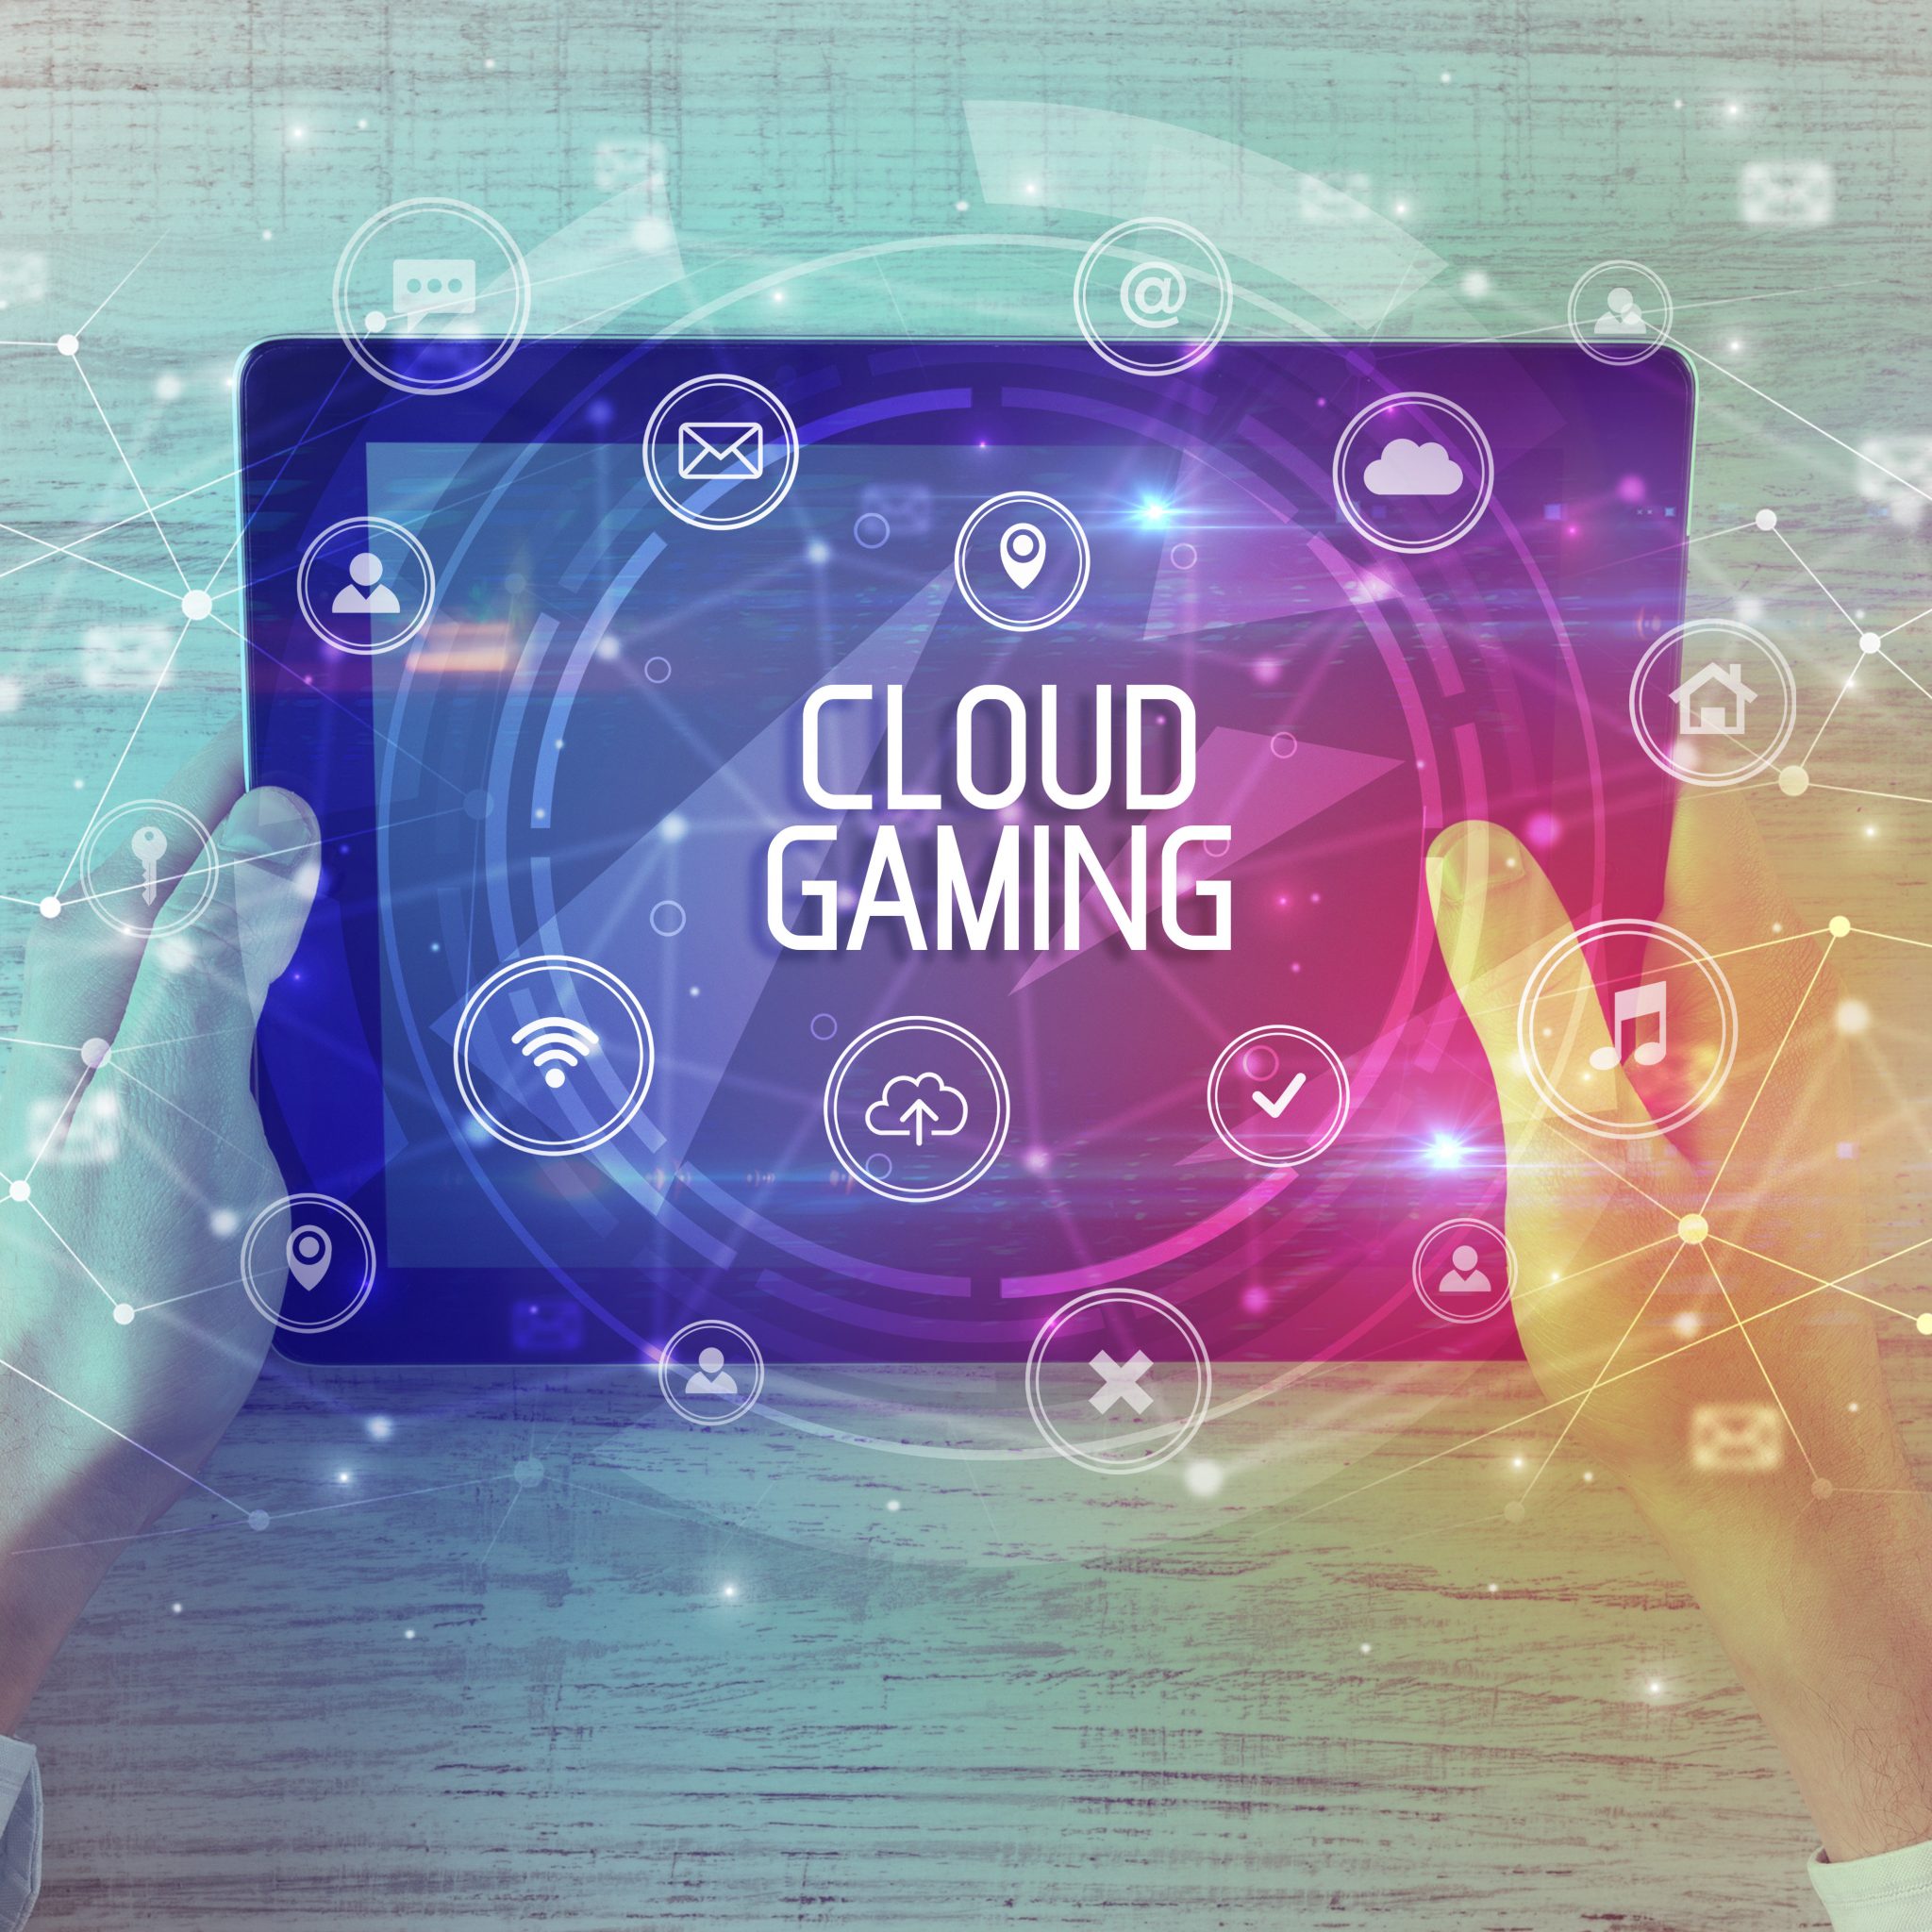 Cloud gaming to generate $1.6 billion in 2021, according to Newzoo